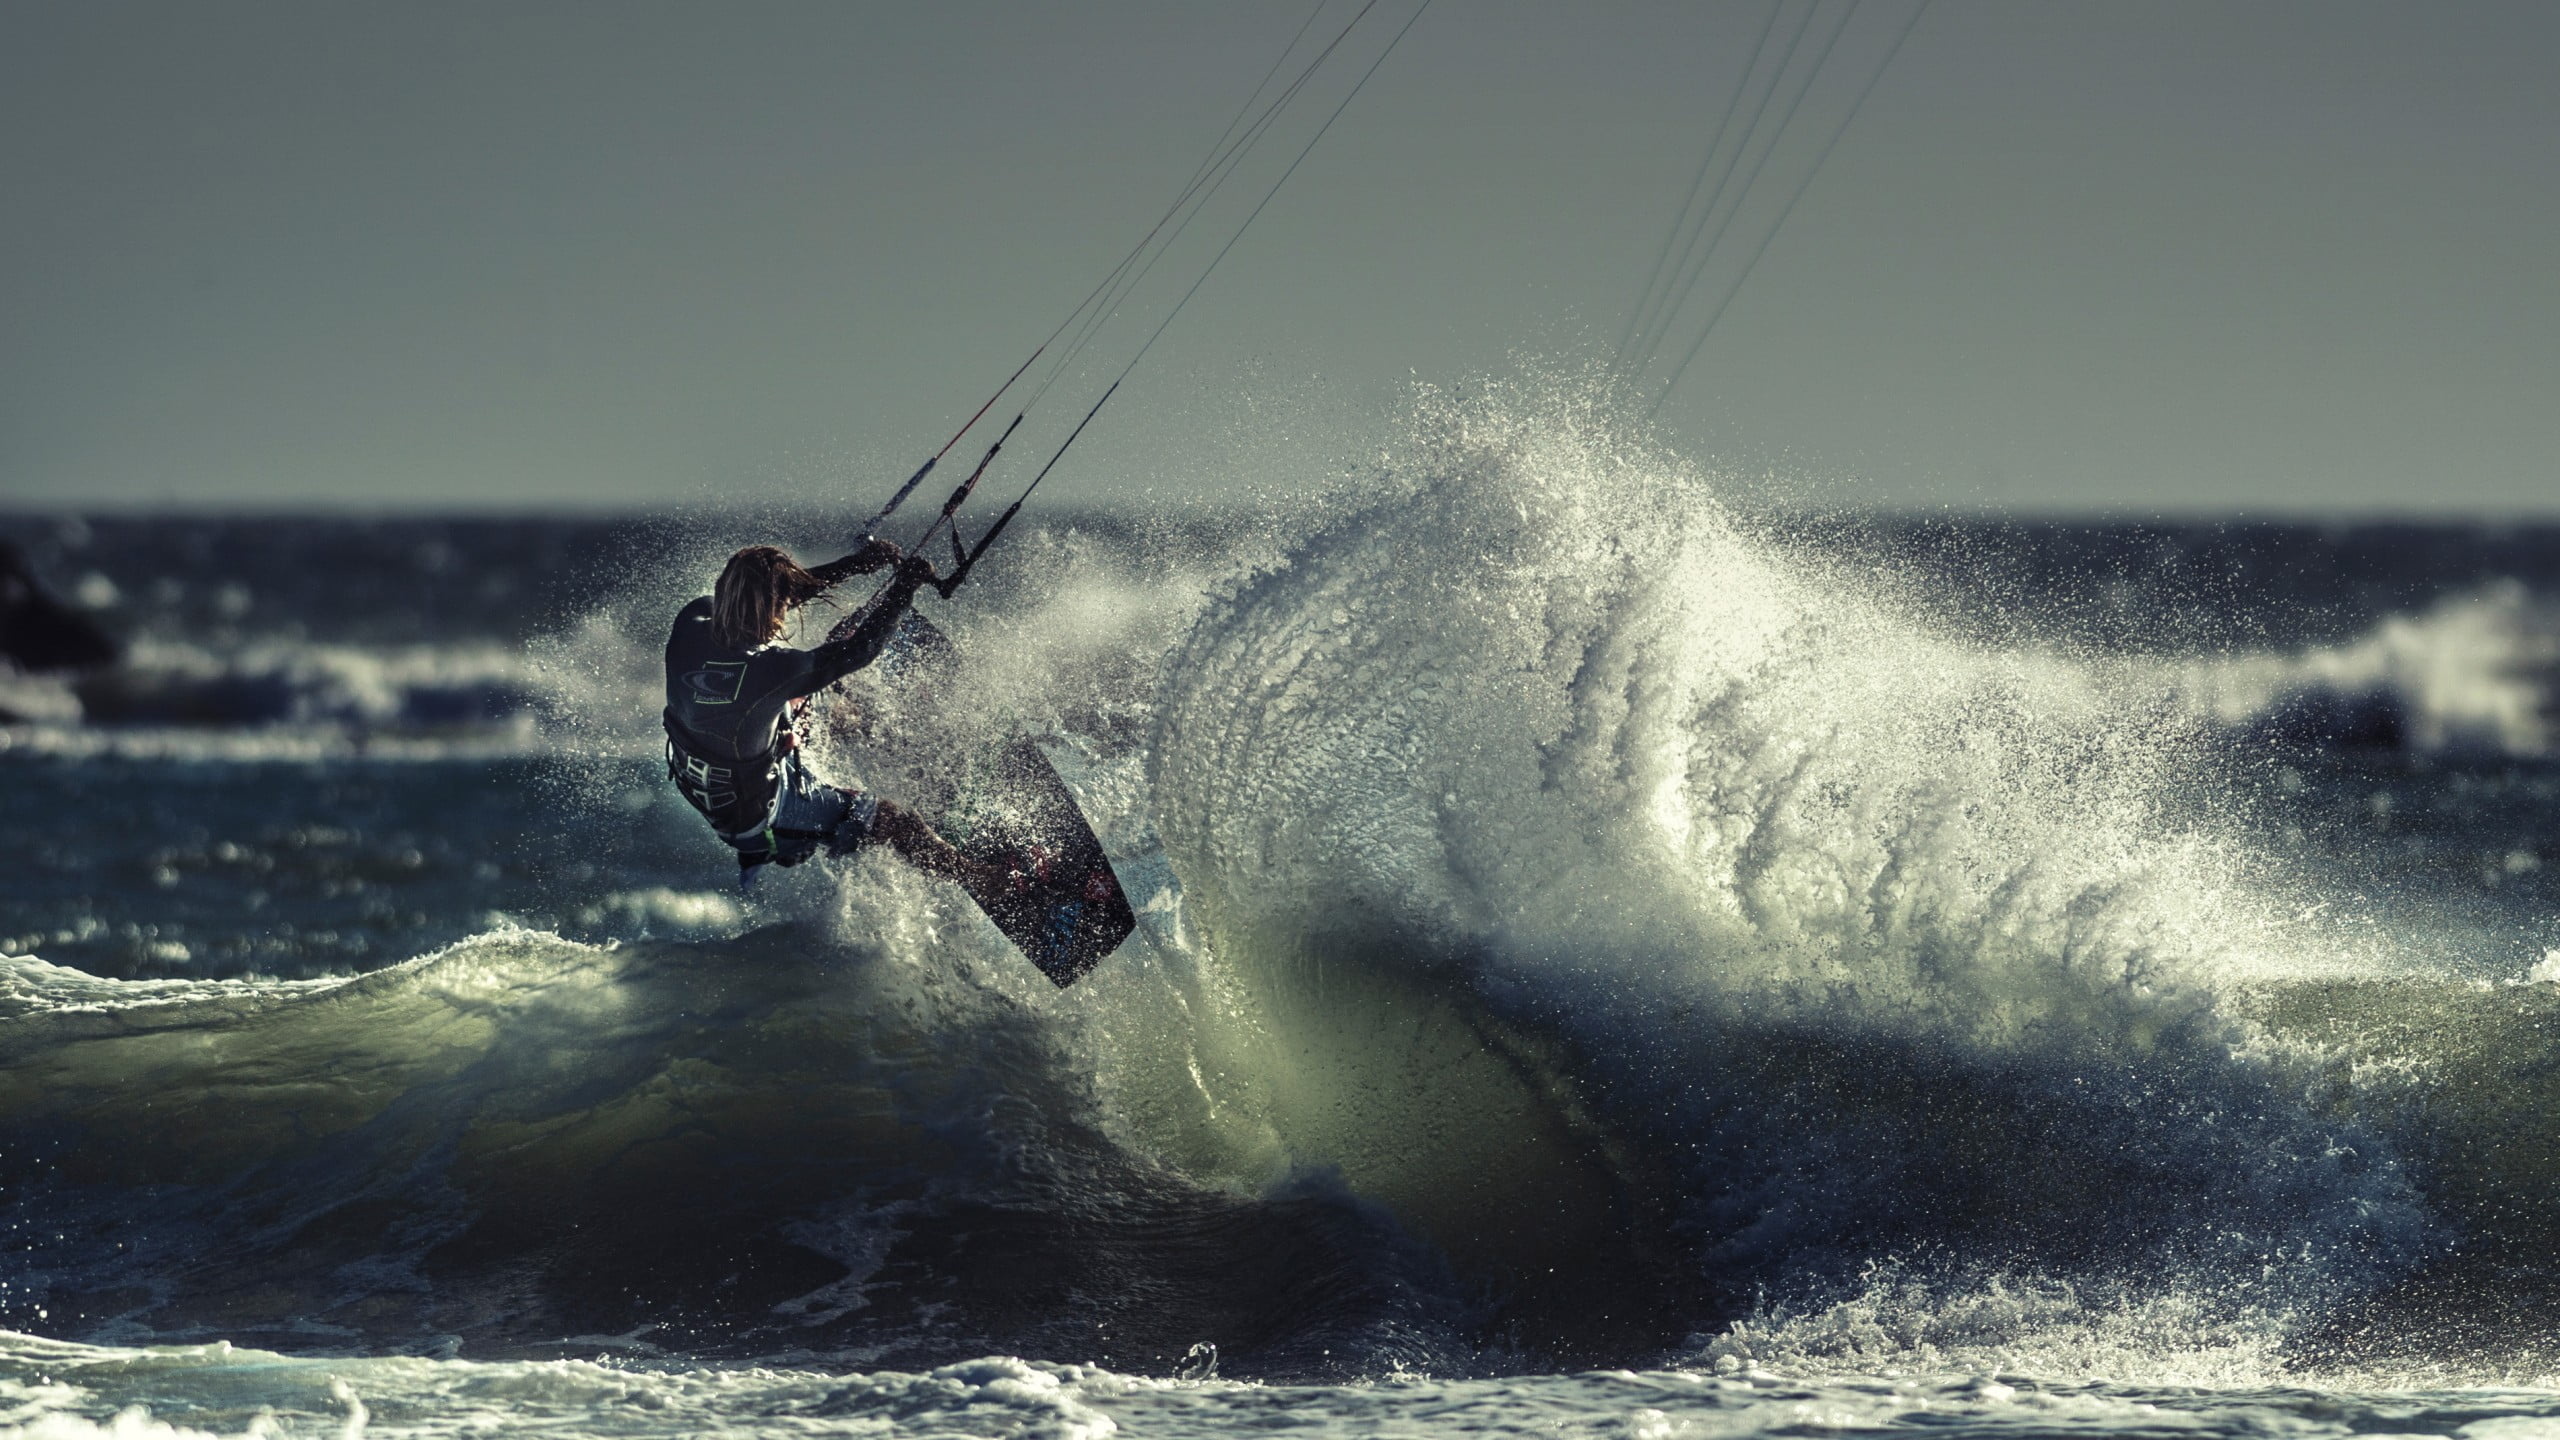 Kiteboarding: Waves, Weather conditions for kitesurfing, Extreme sports. 2560x1440 HD Wallpaper.